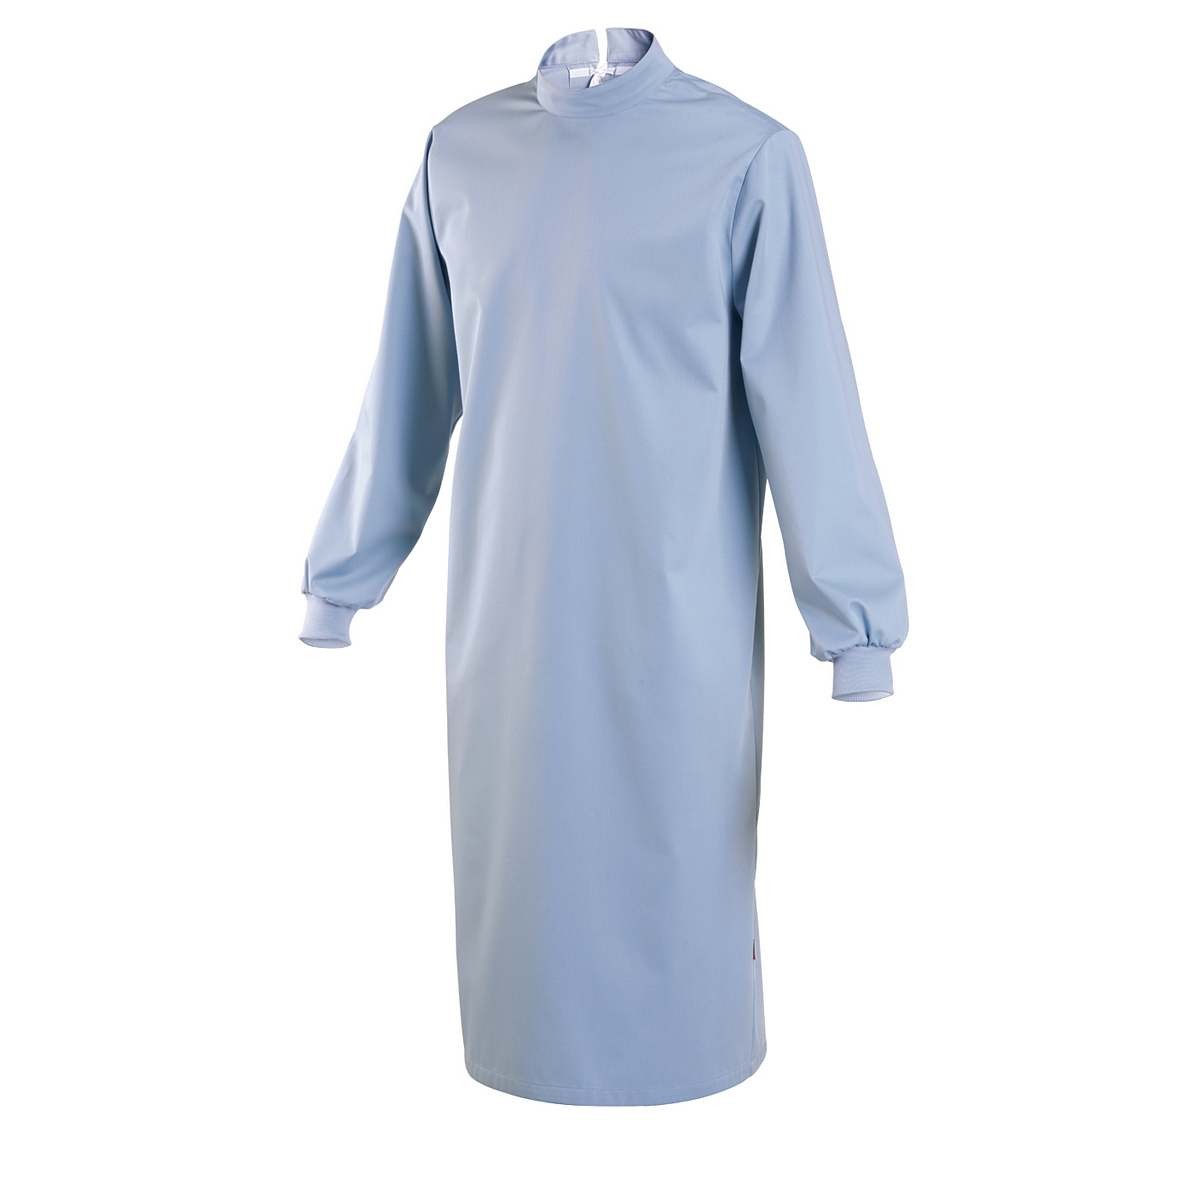 Surgical gown EDWIN - Surgical gown EDWIN